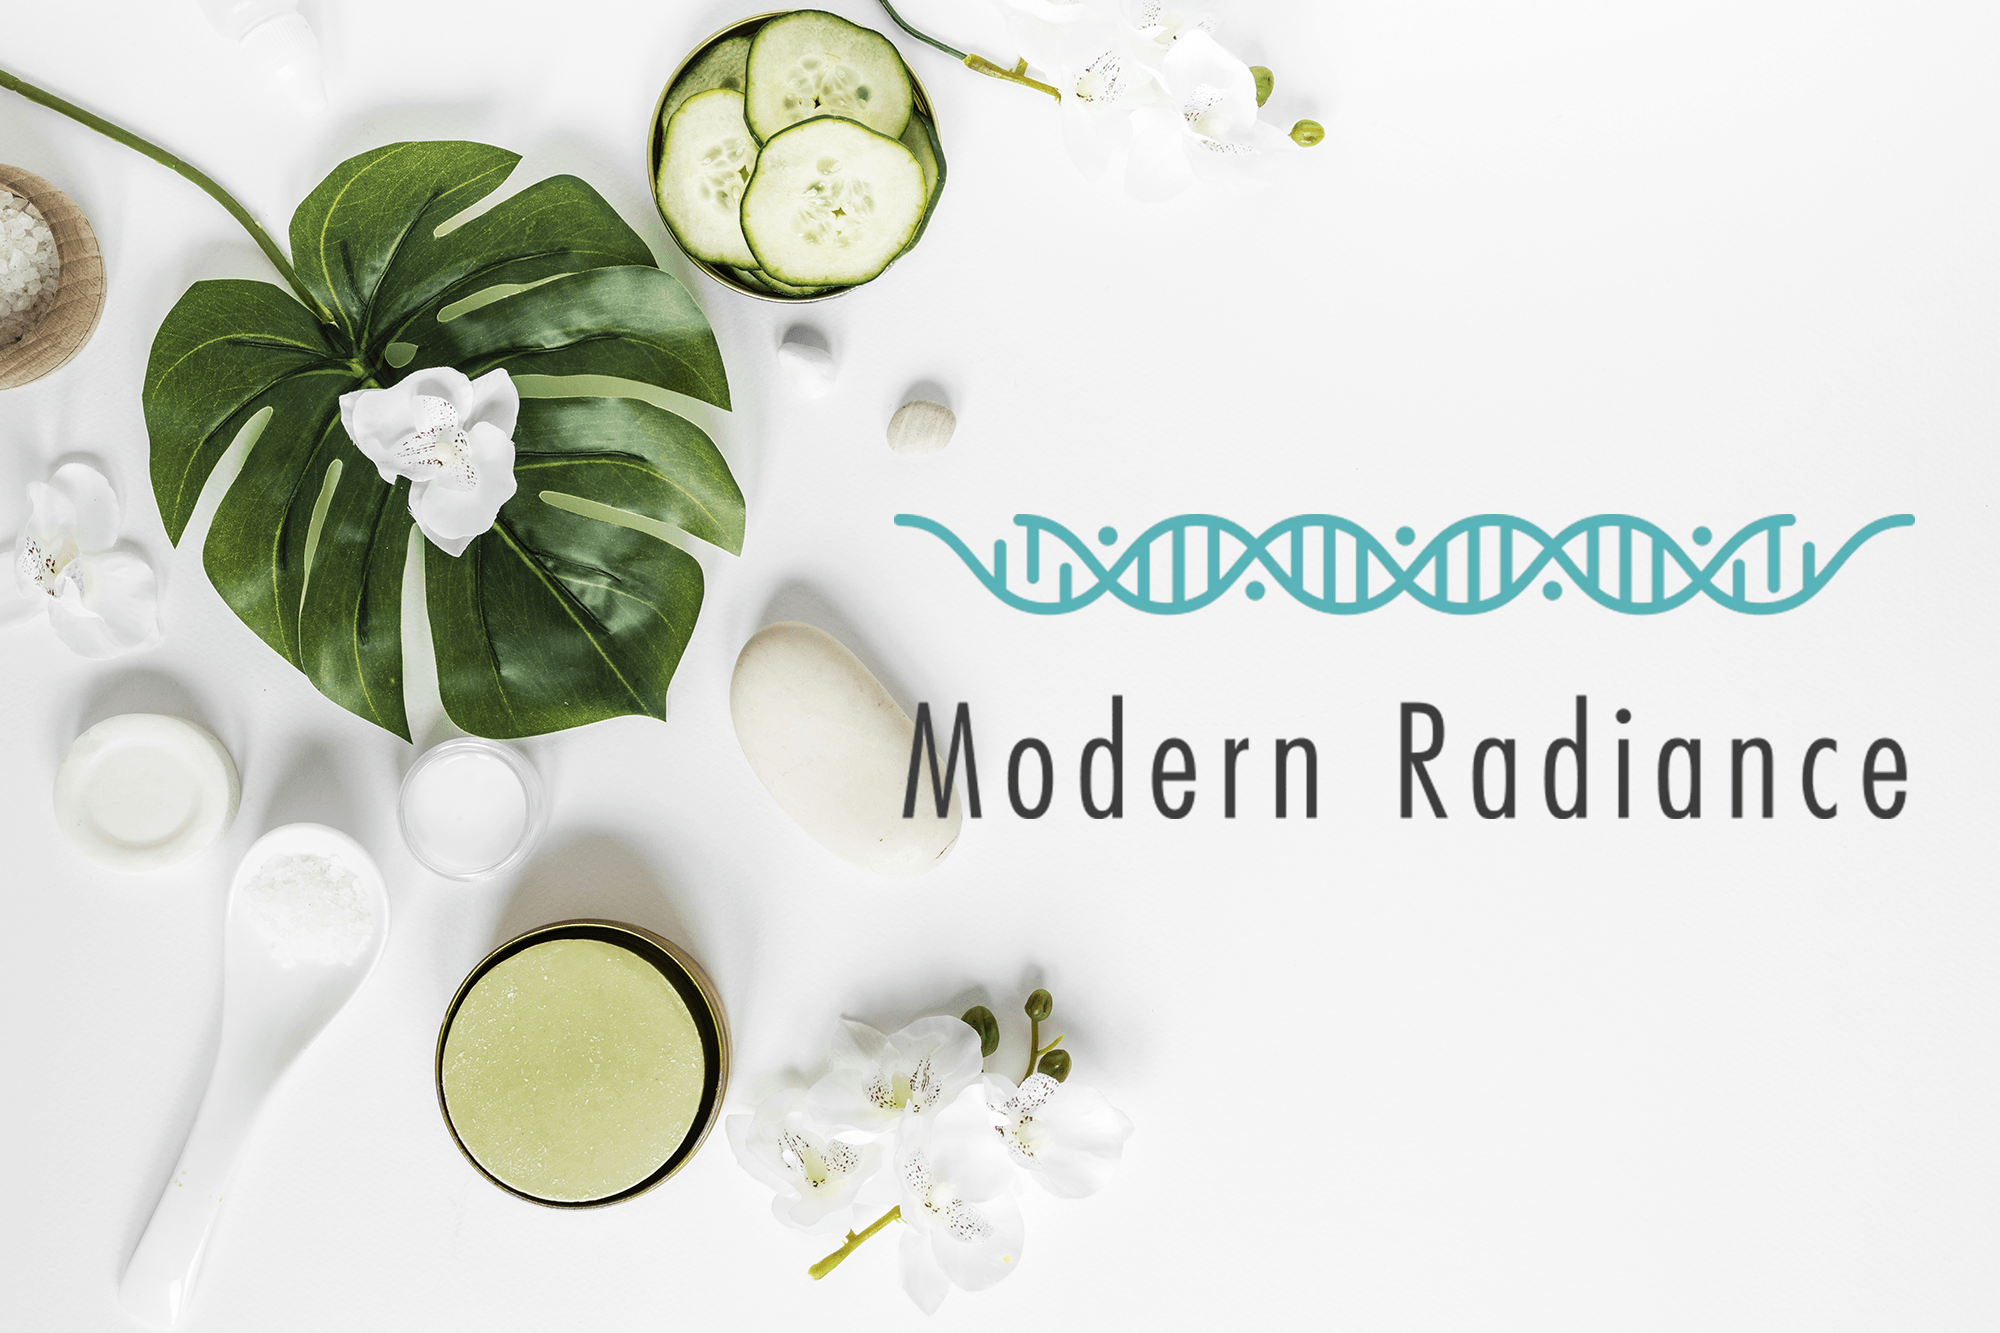 Soothing natural skincare products arranged aesthetically with a green monstera leaf and delicate white flowers, embodying the essence of 'modern radiance'.